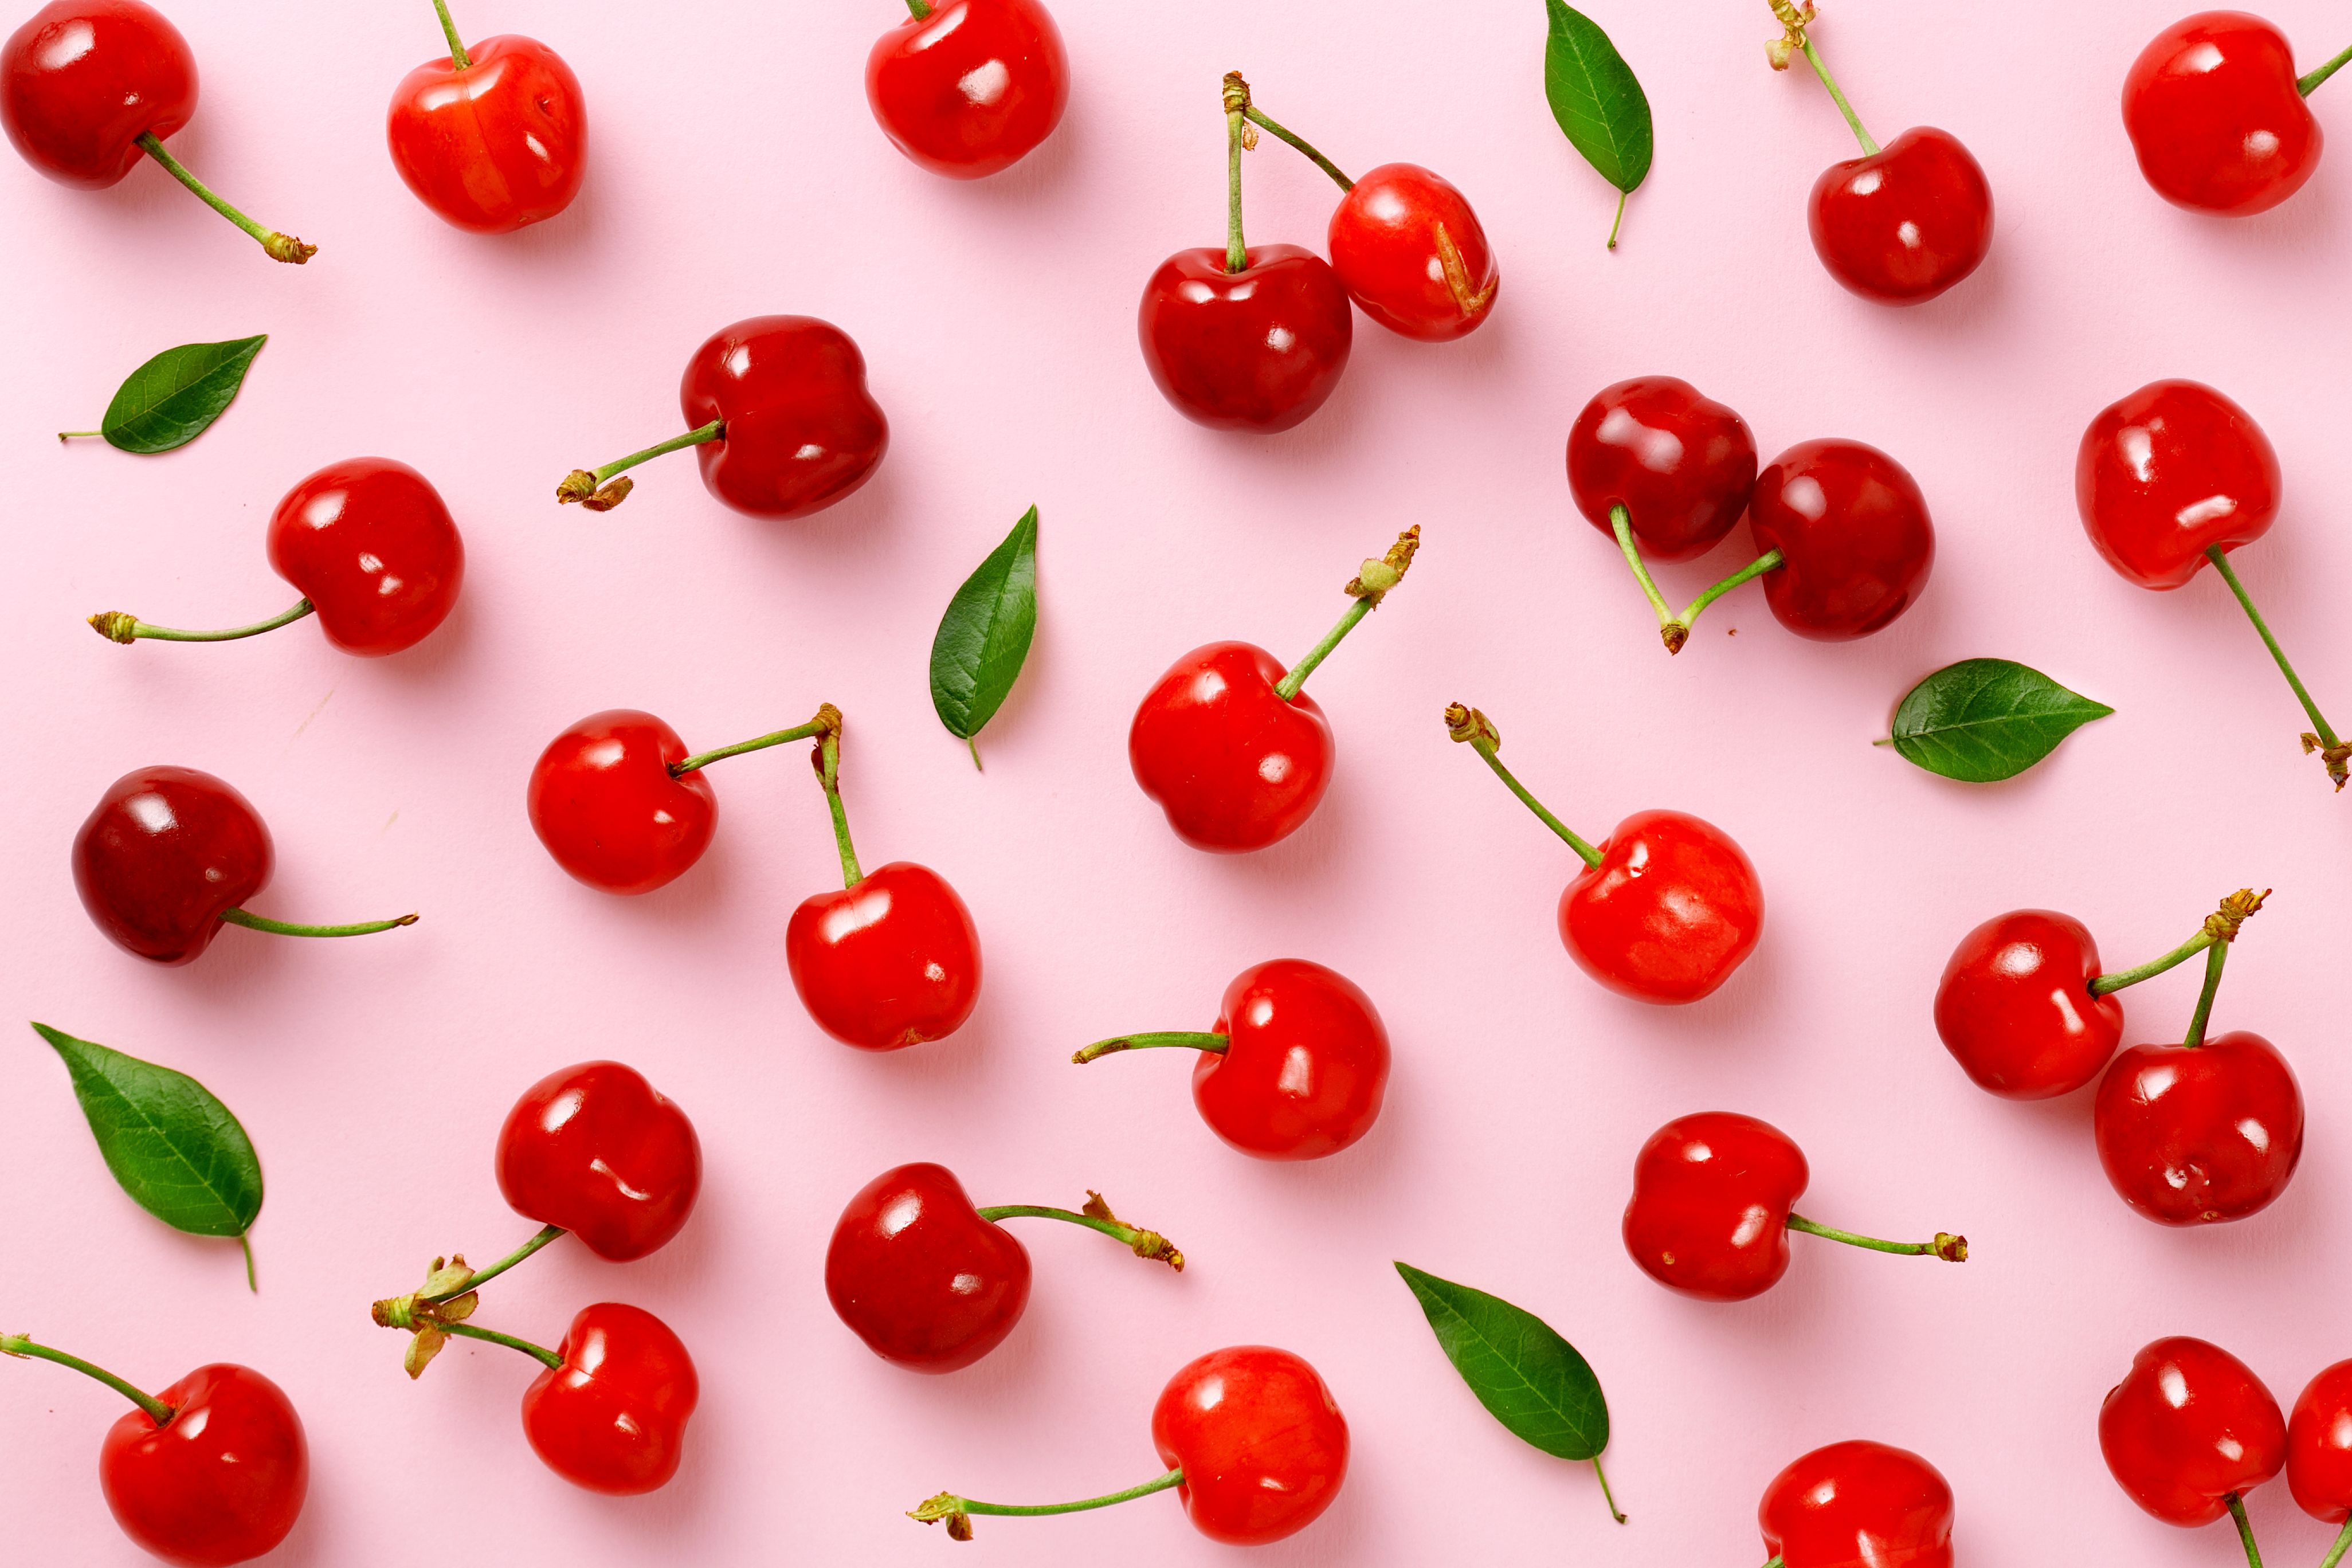 8 Health Benefits Of Cherries, According To Nutritionists